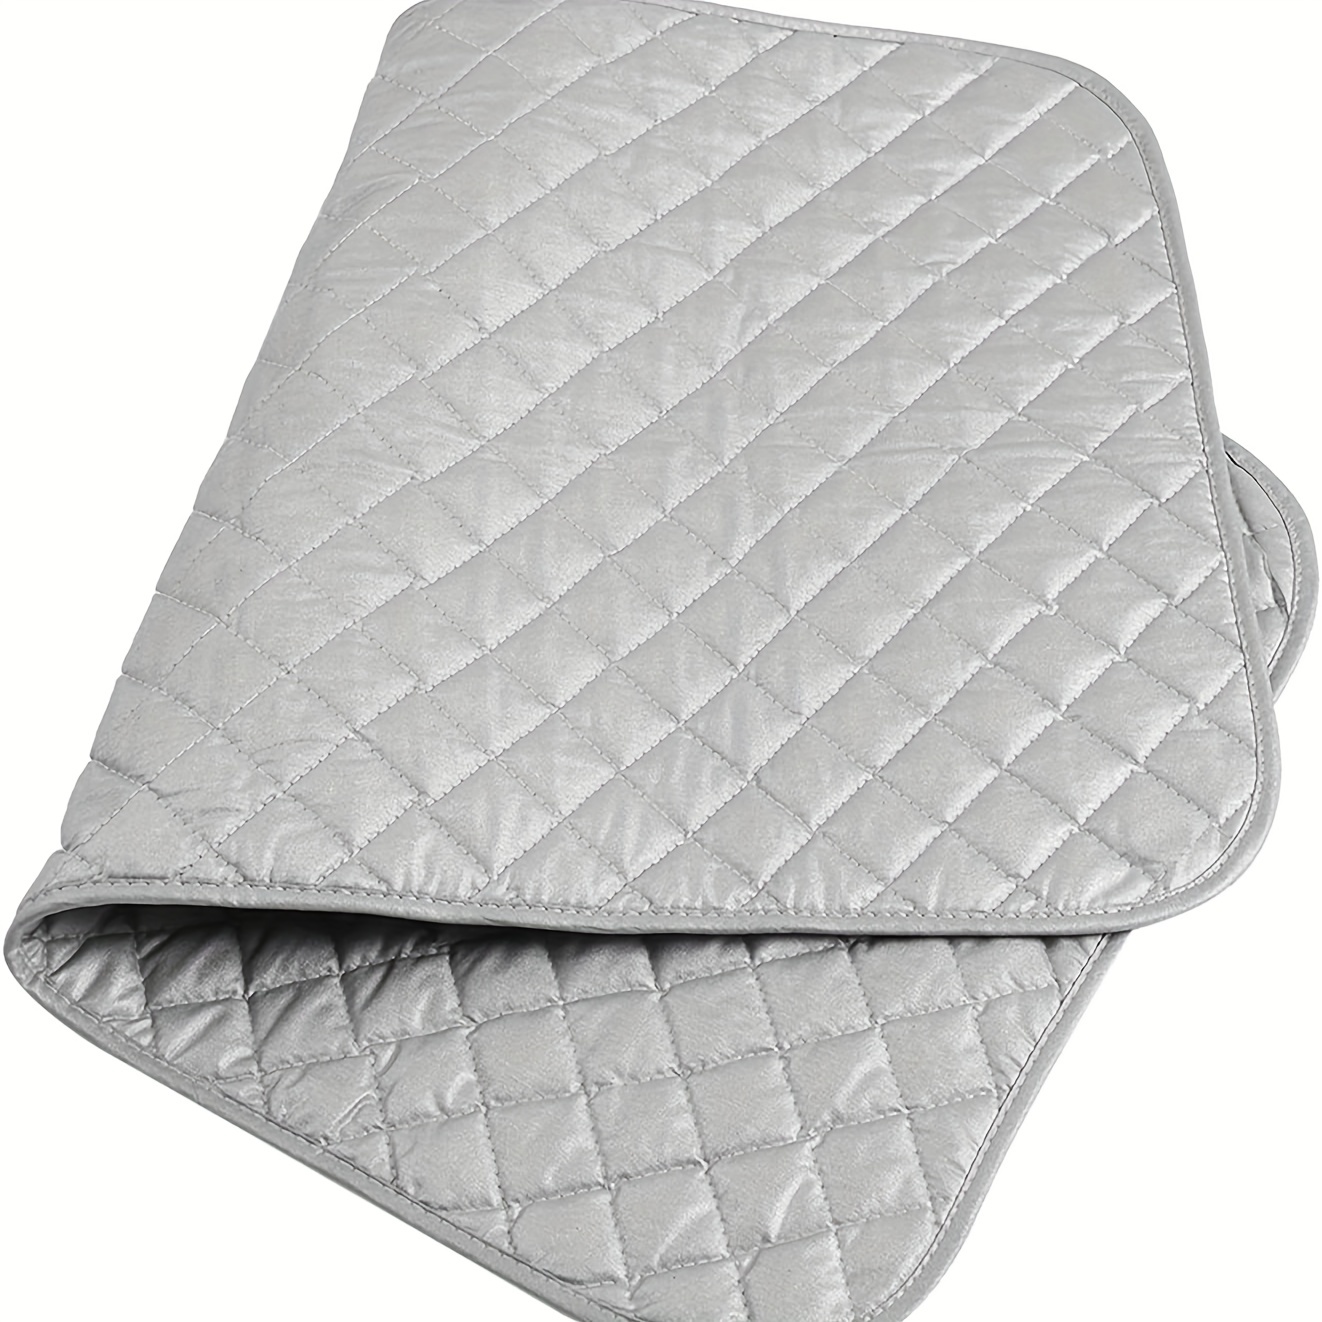 Quilted Stove Top Cover Stove Protector For Glass Ceramic Stoves